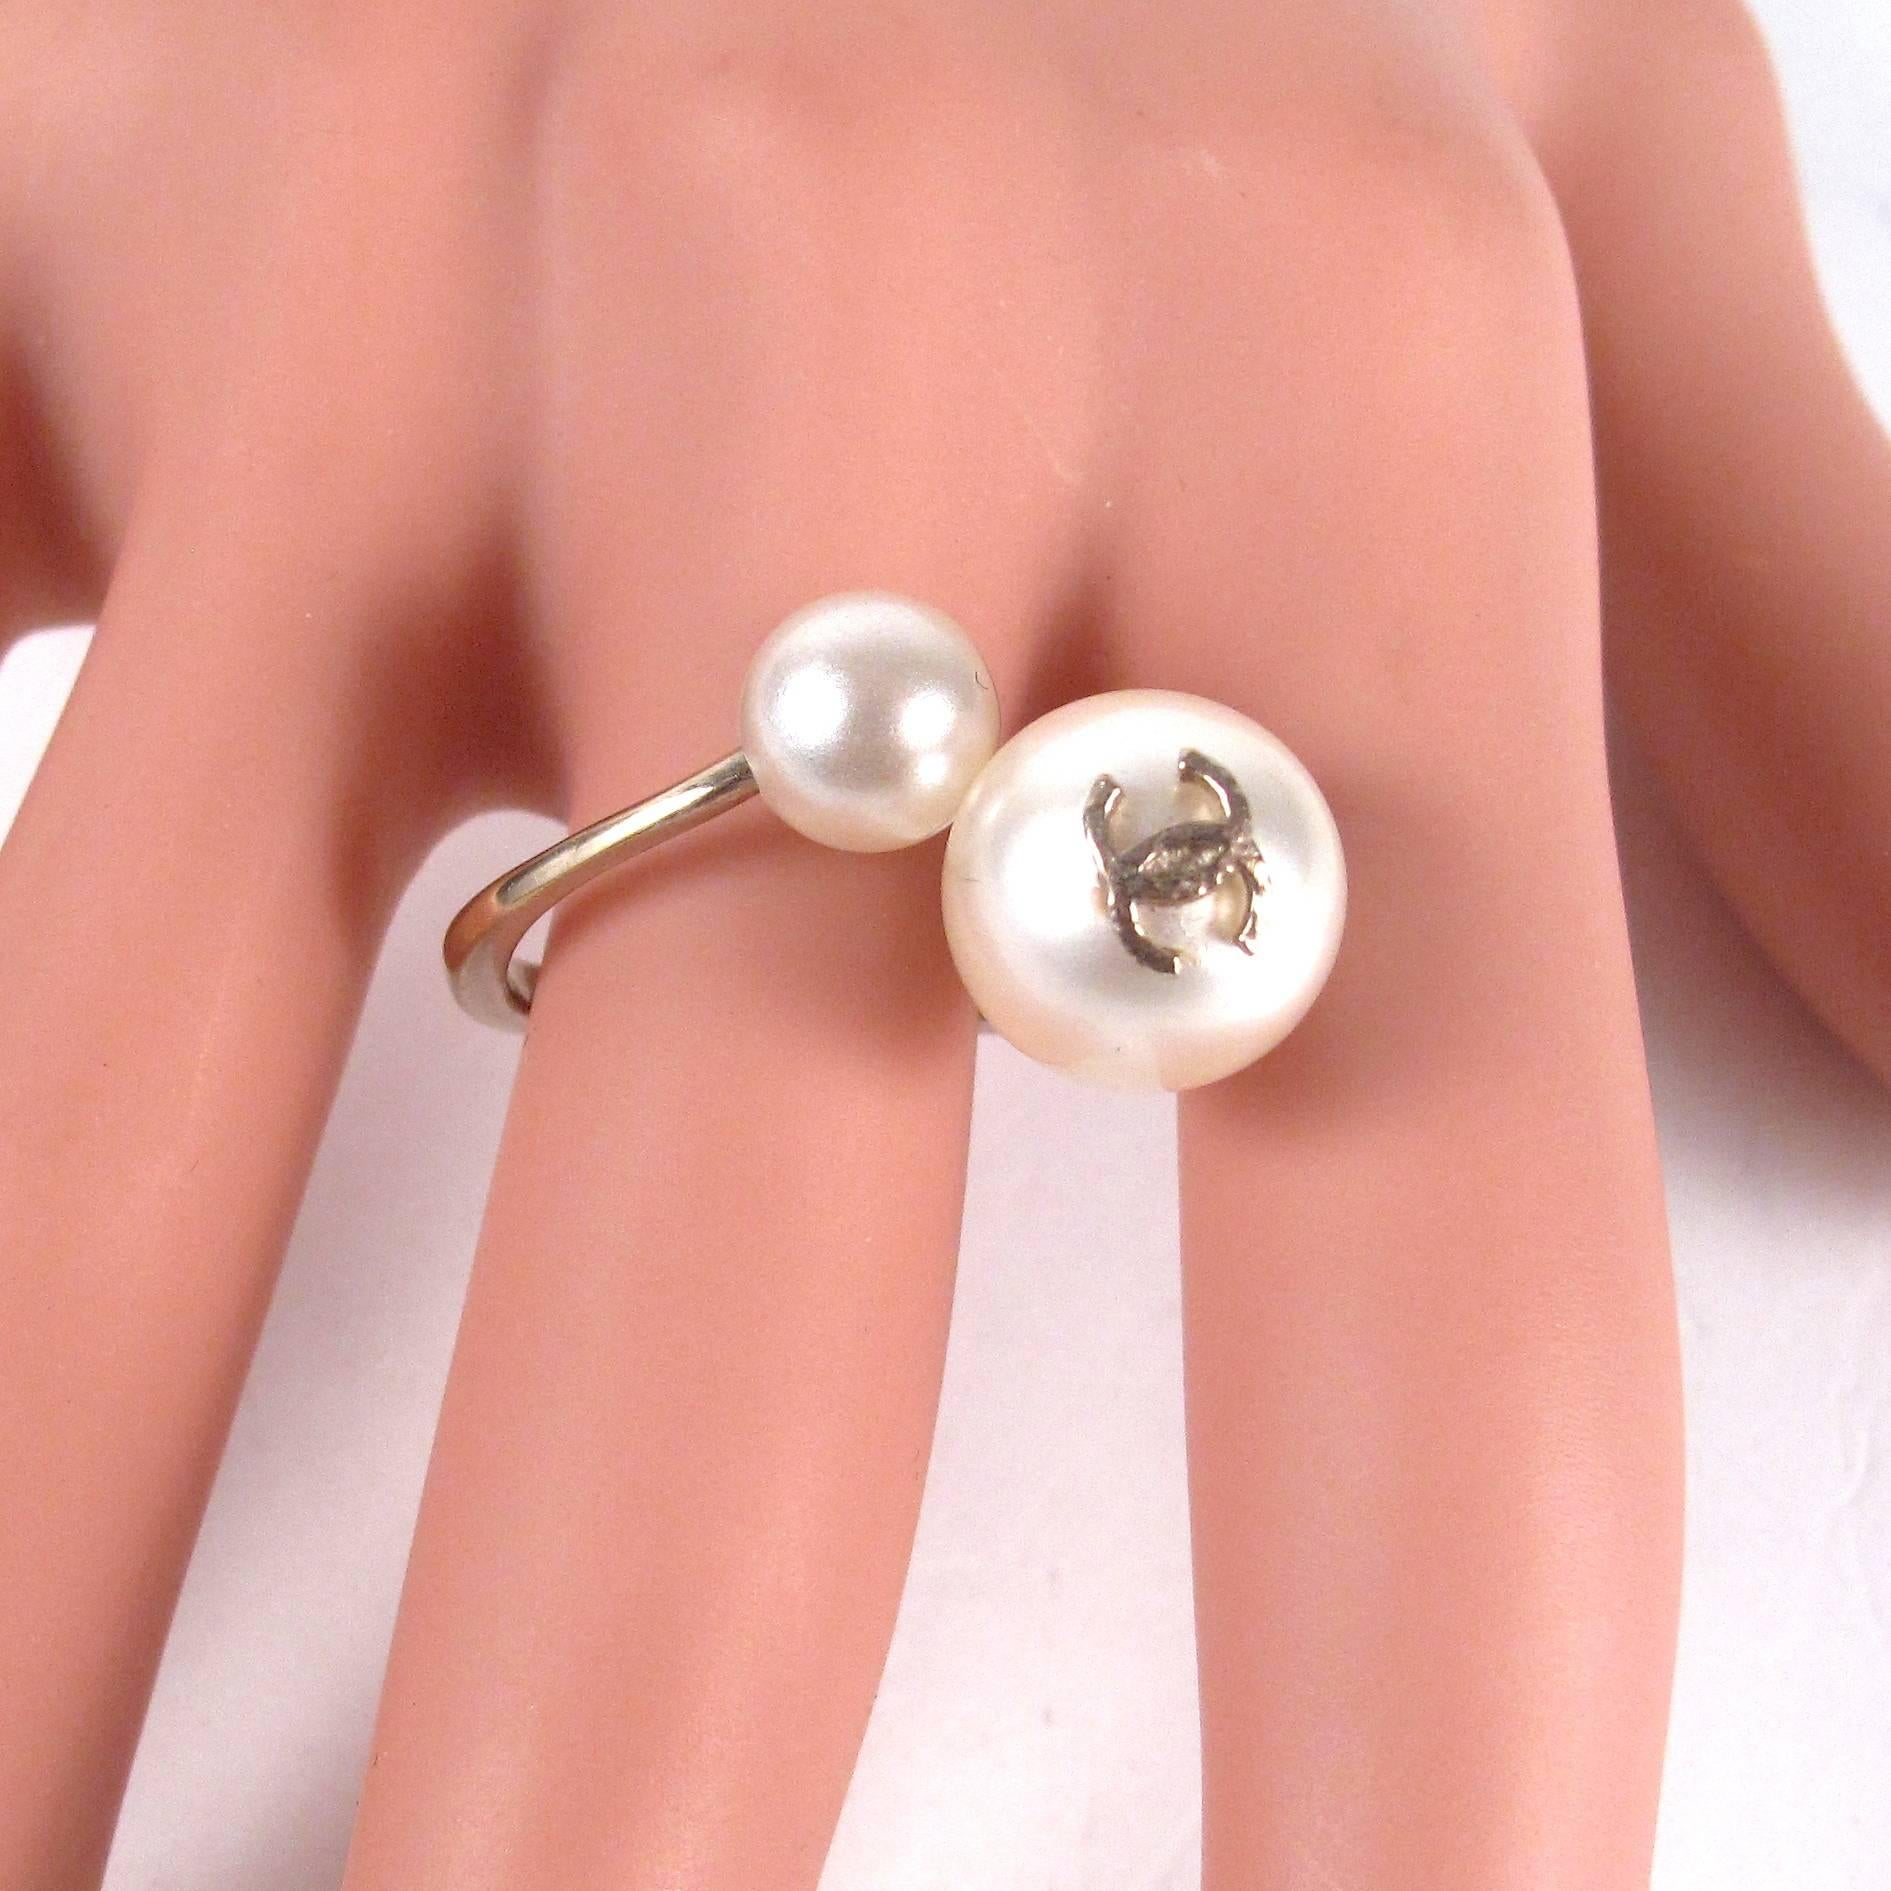 Chanel - Double Pearl Ring

Size: US: 6.5 - French Size: 52 & 3/4

Color: Gold

Material: Metal / Pearl (Imitation)

------------------------------------------------------------

Details:

- gold tone hardware

- large & small pearl